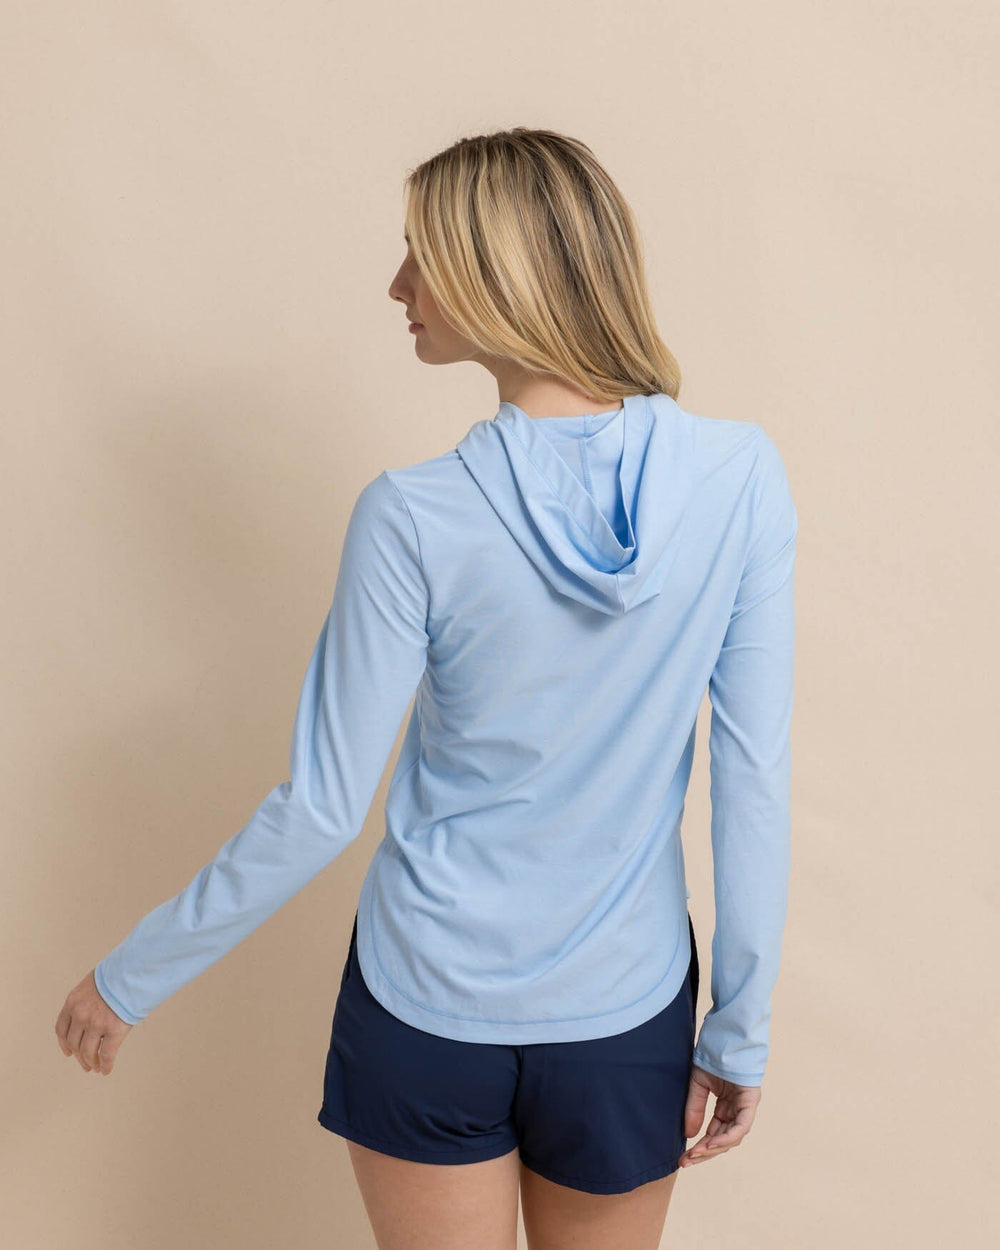 The back view of the Southern Tide Linley brrr illiant Performance Hoodie by Southern Tide - Clearwater Blue